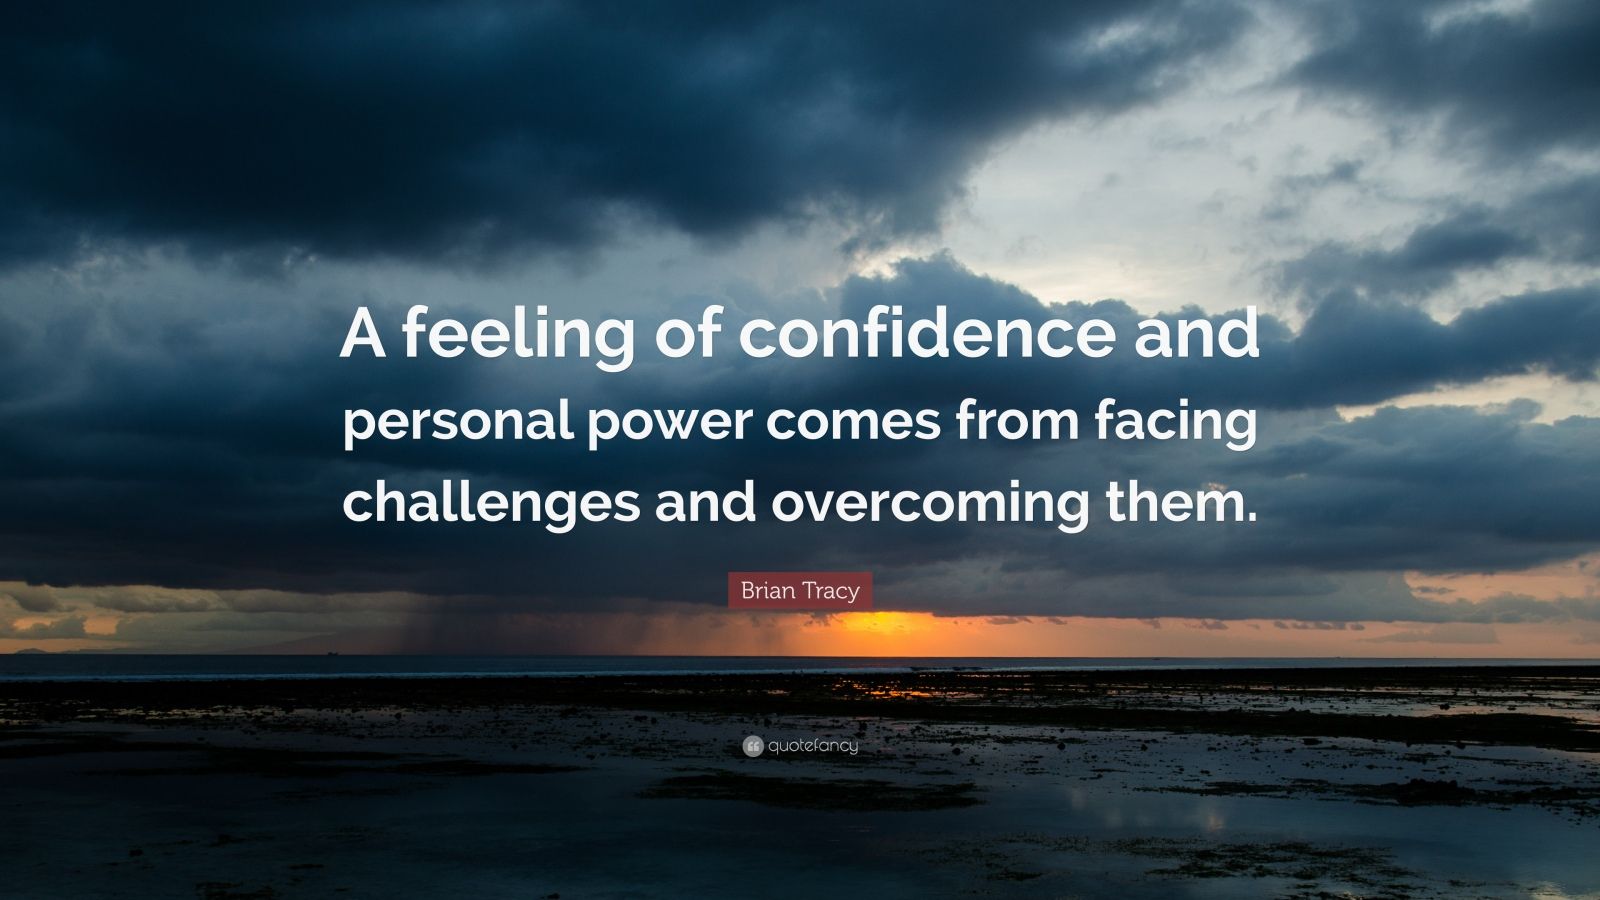 Brian Tracy Quote: "A feeling of confidence and personal ...